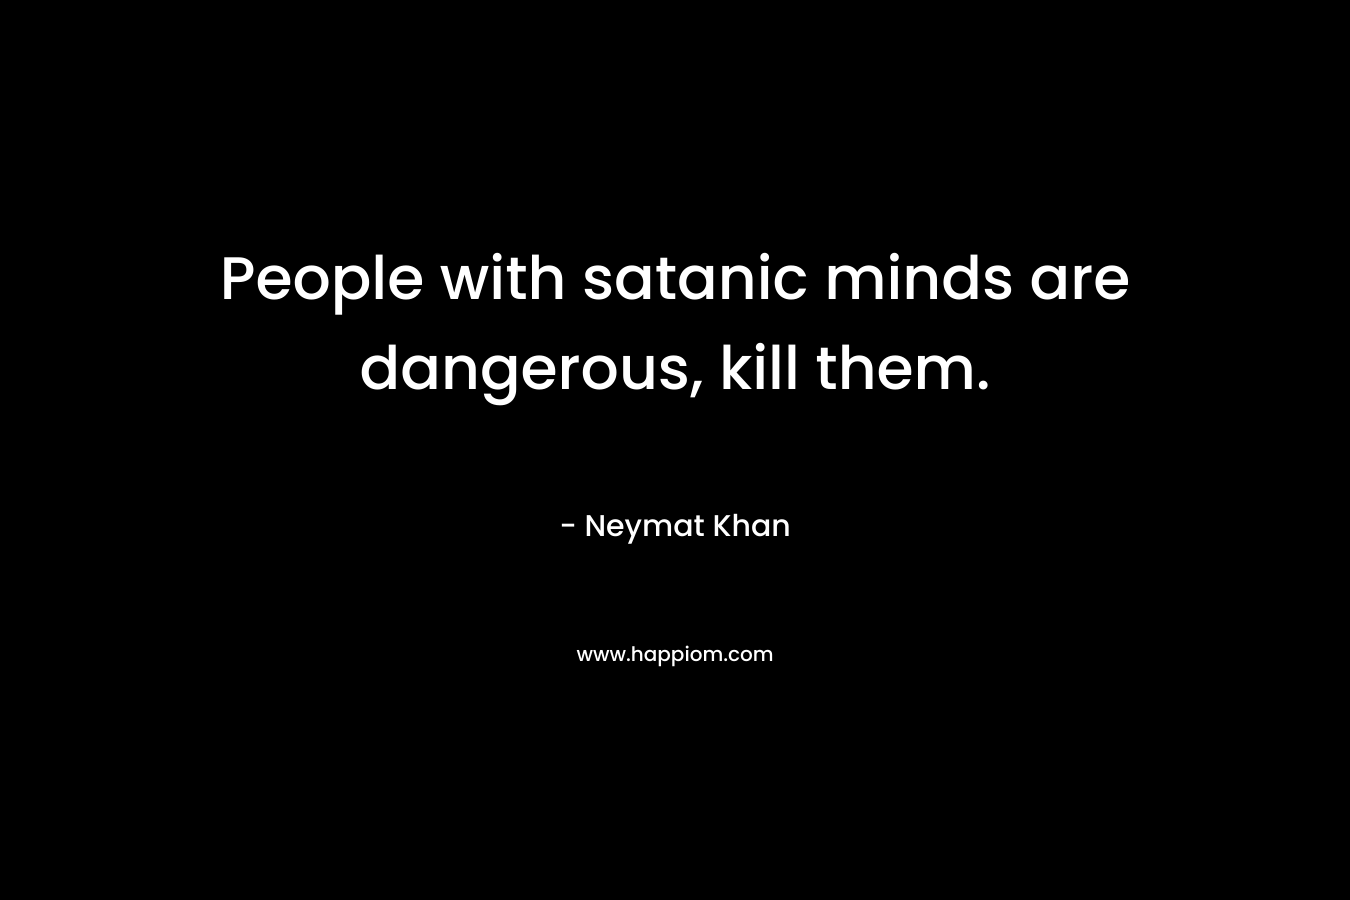 People with satanic minds are dangerous, kill them.